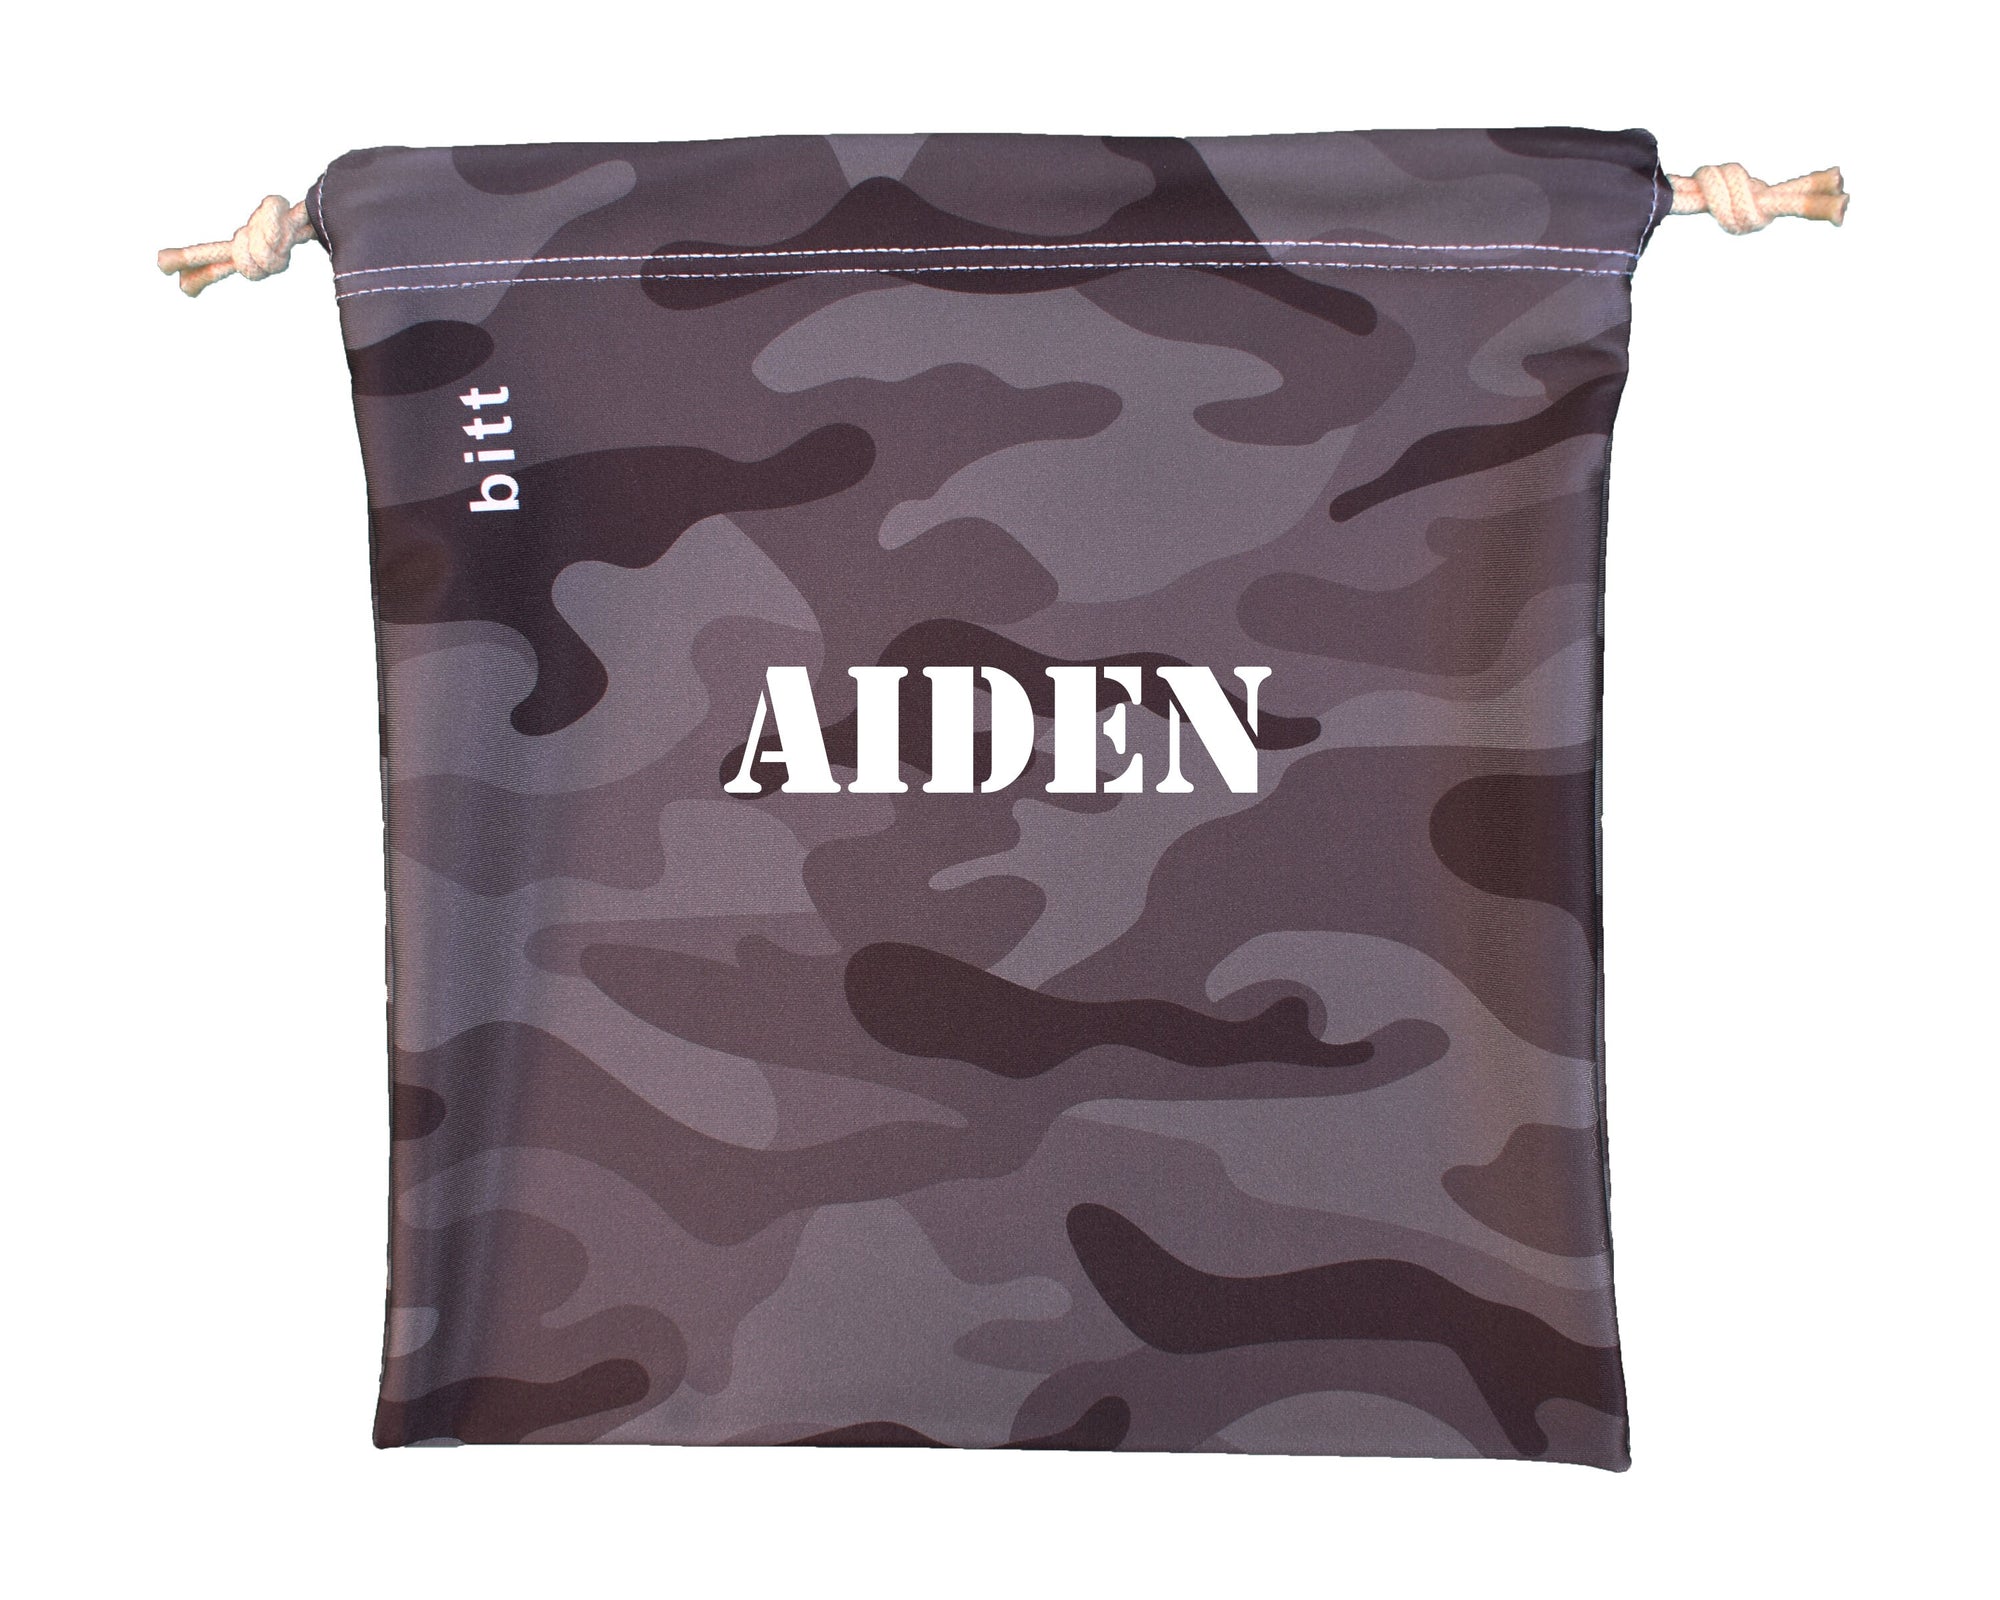 Personalized Gymnastics Grip Bag in Black Camouflage